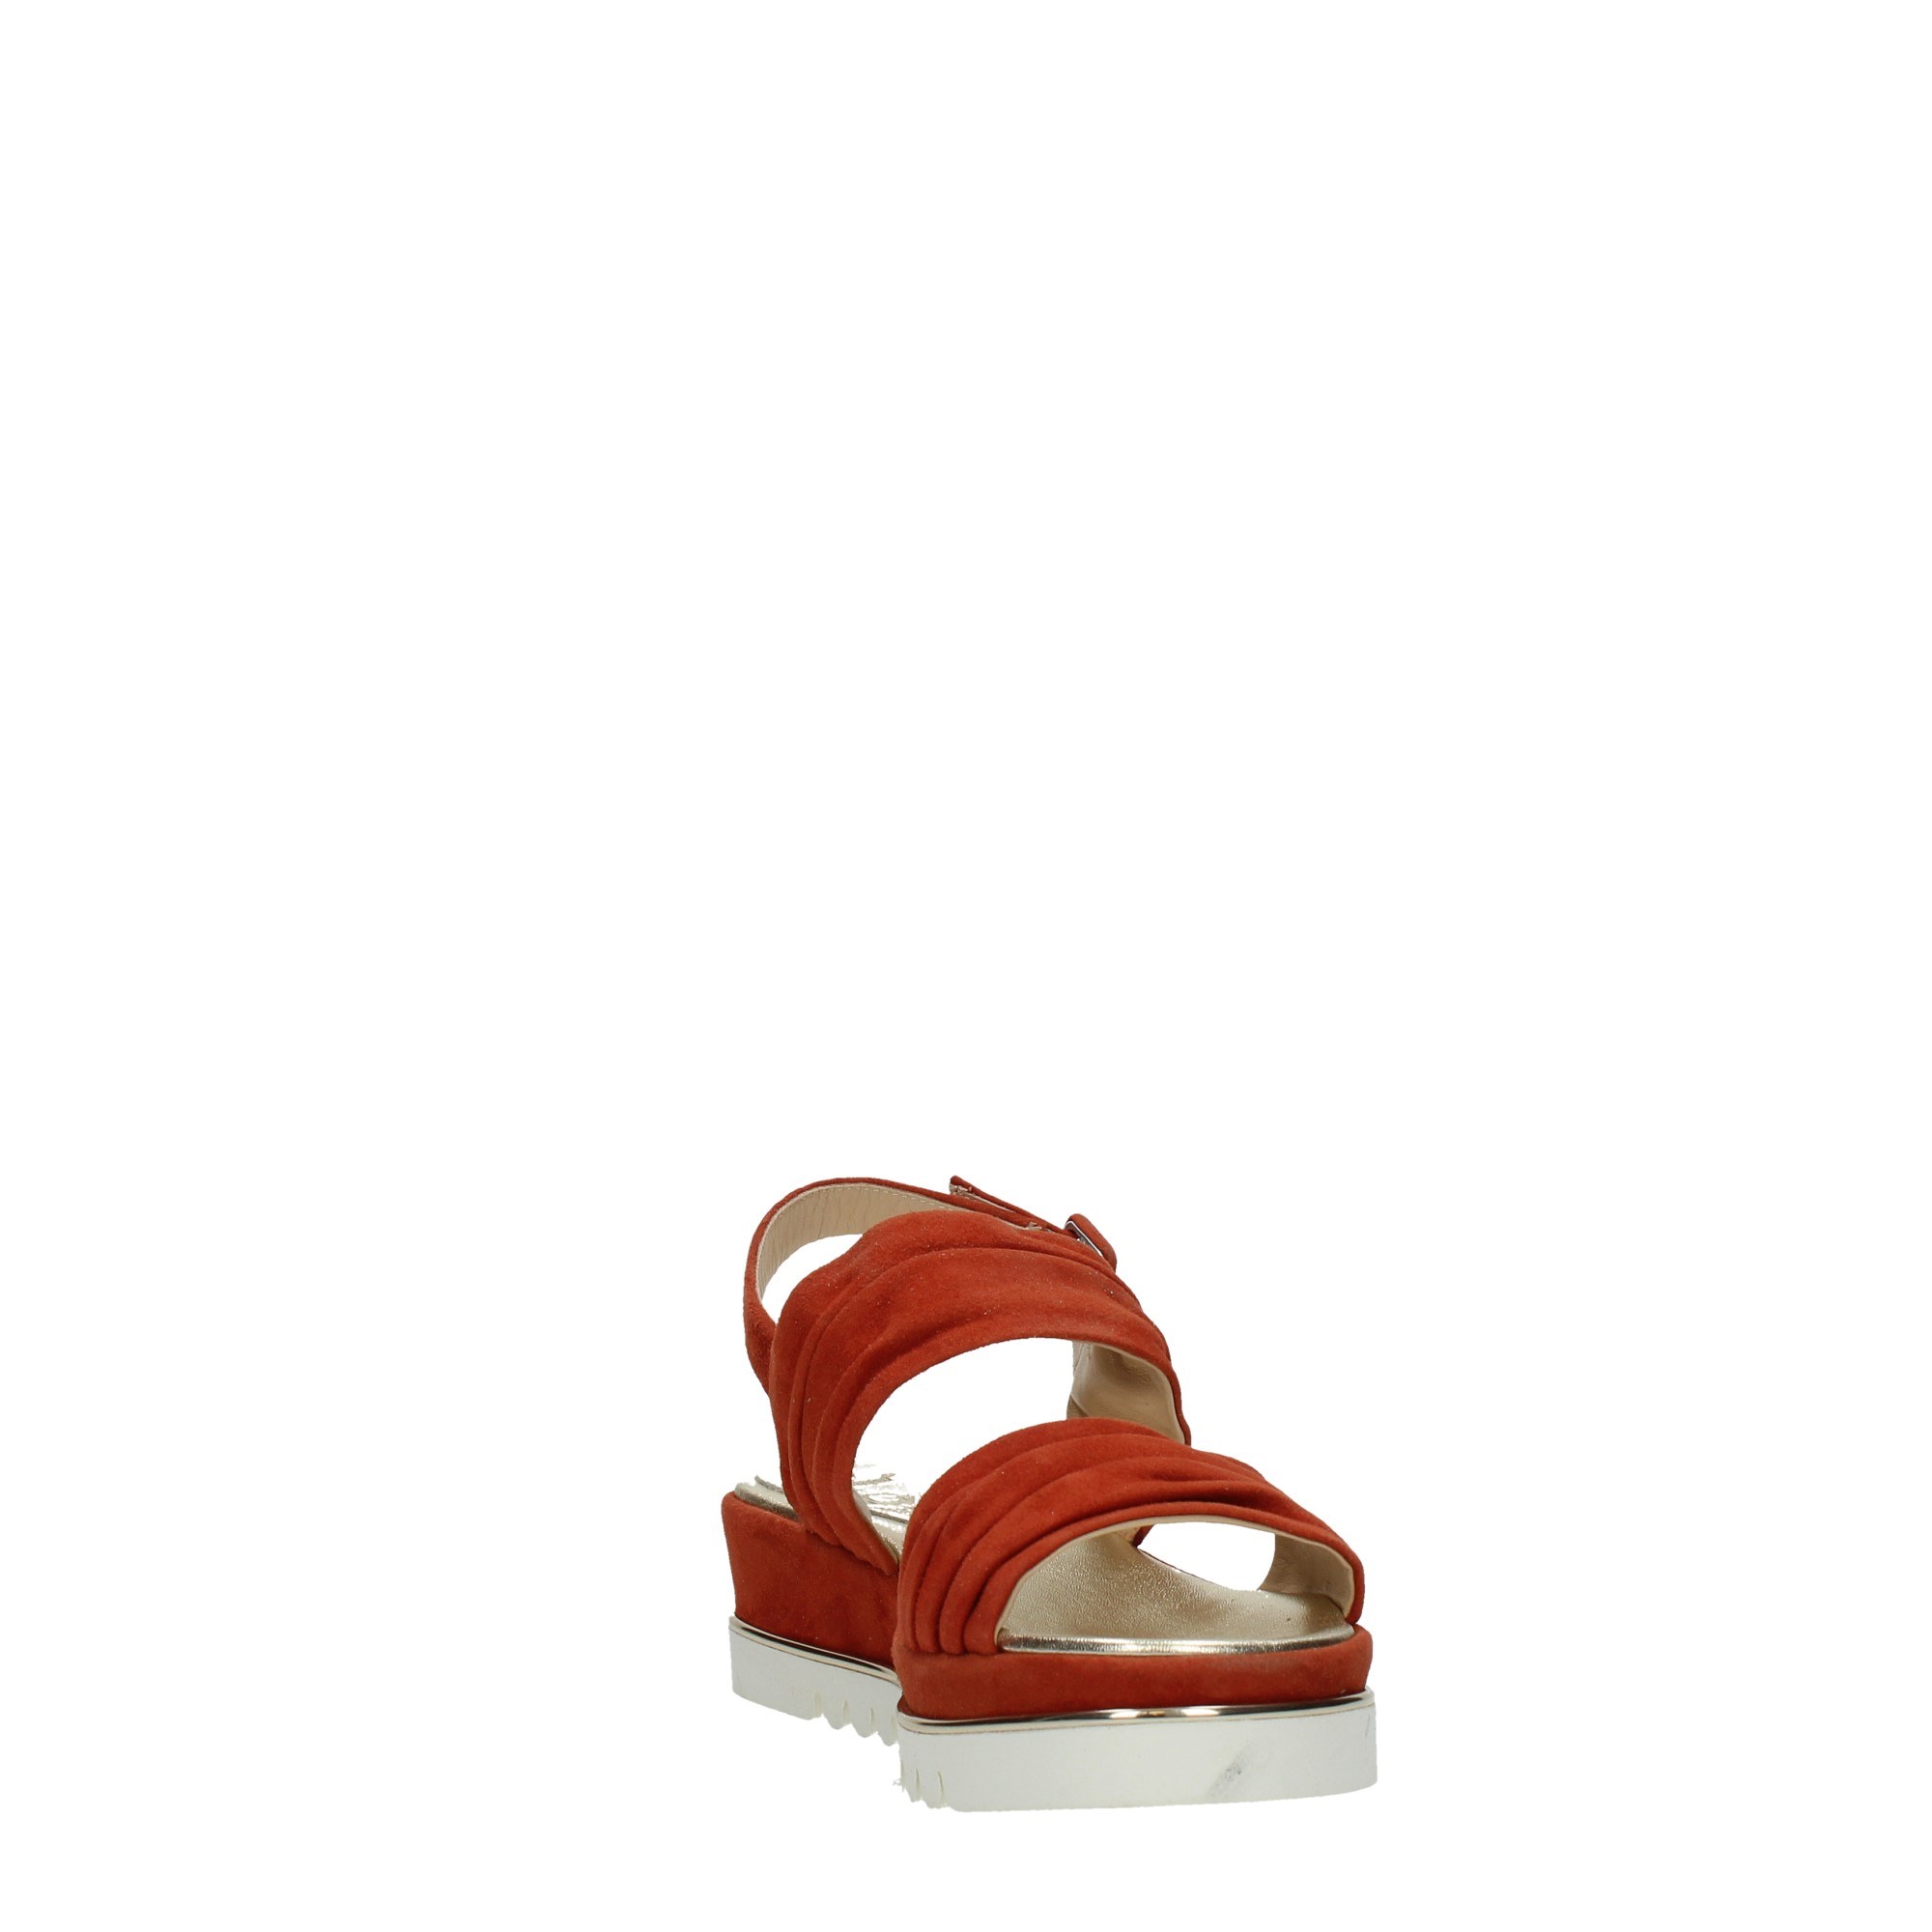 Luca Grossi Shoes Women Wedge Sandals E7345